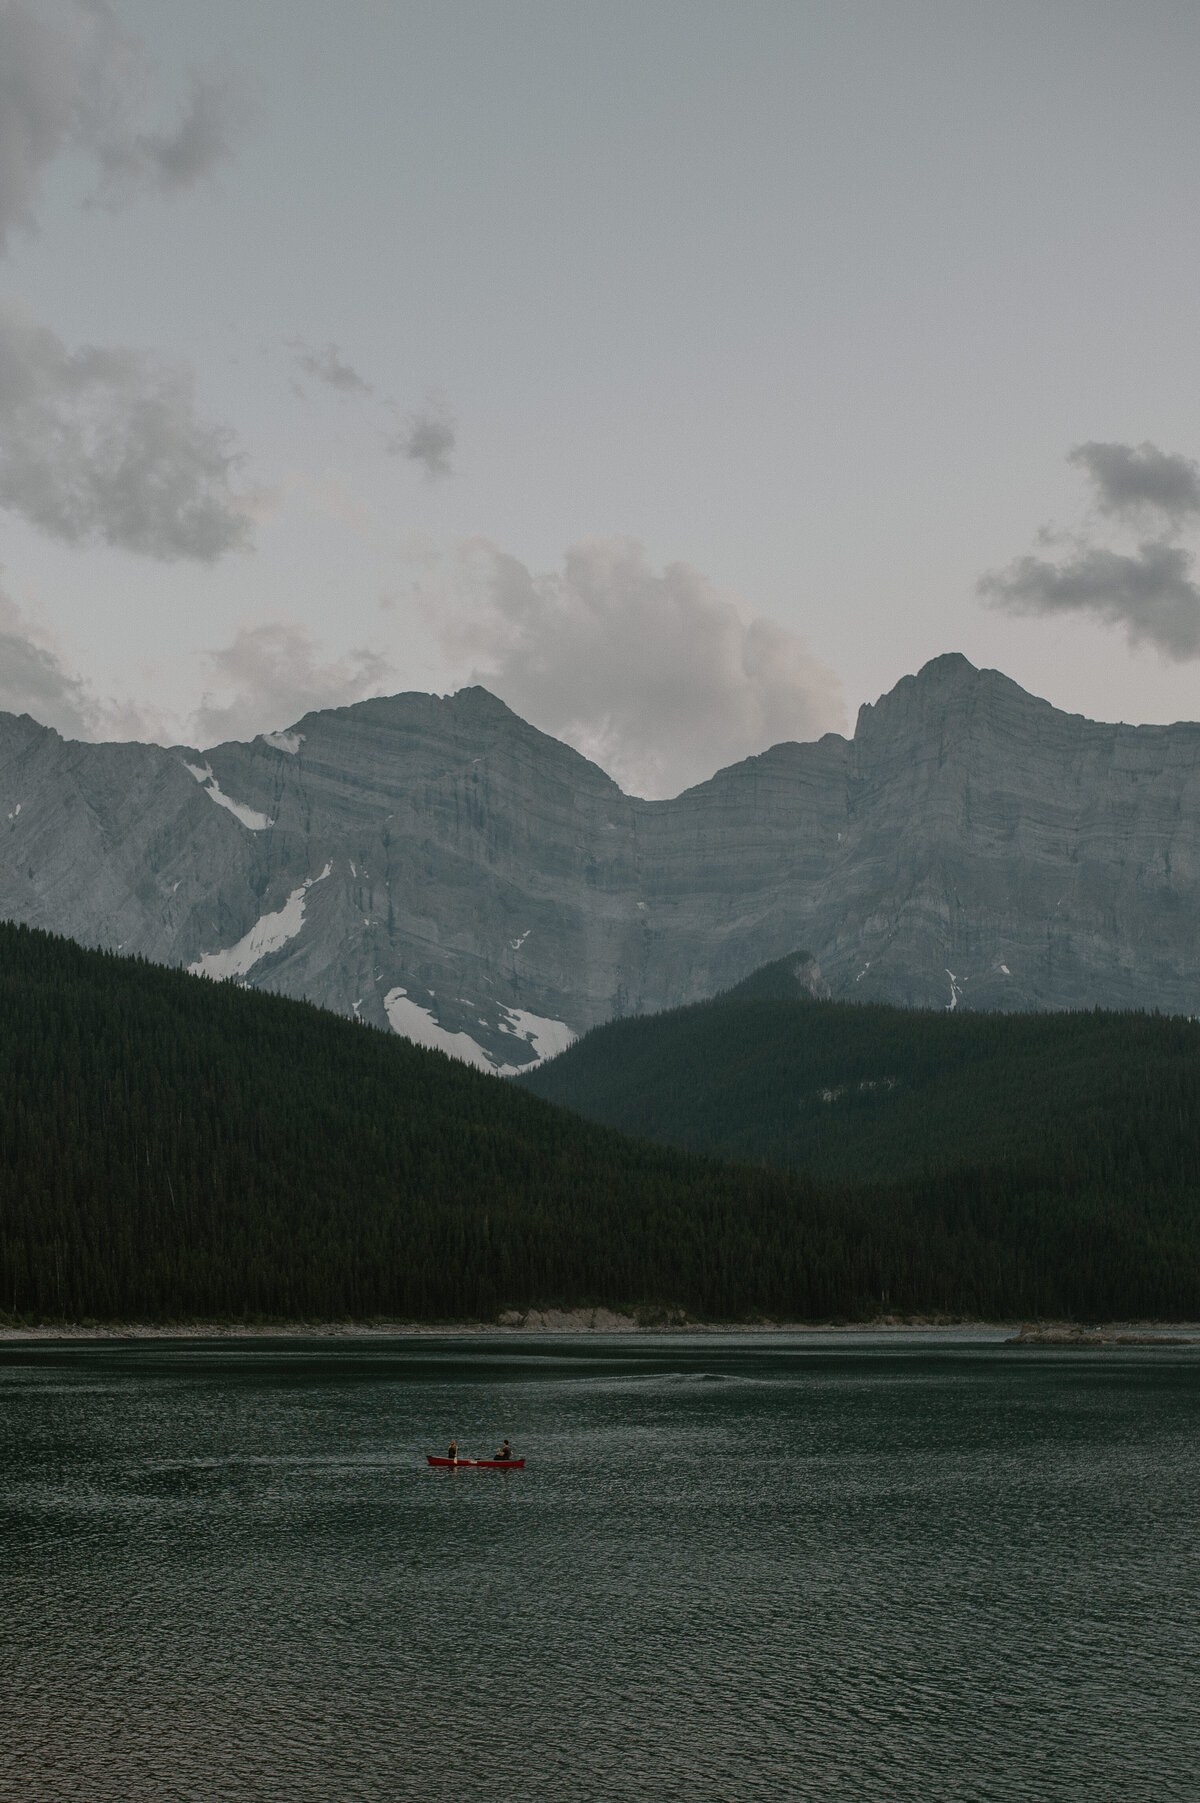 couple canoeing on galcier lake in Alberta, Canada